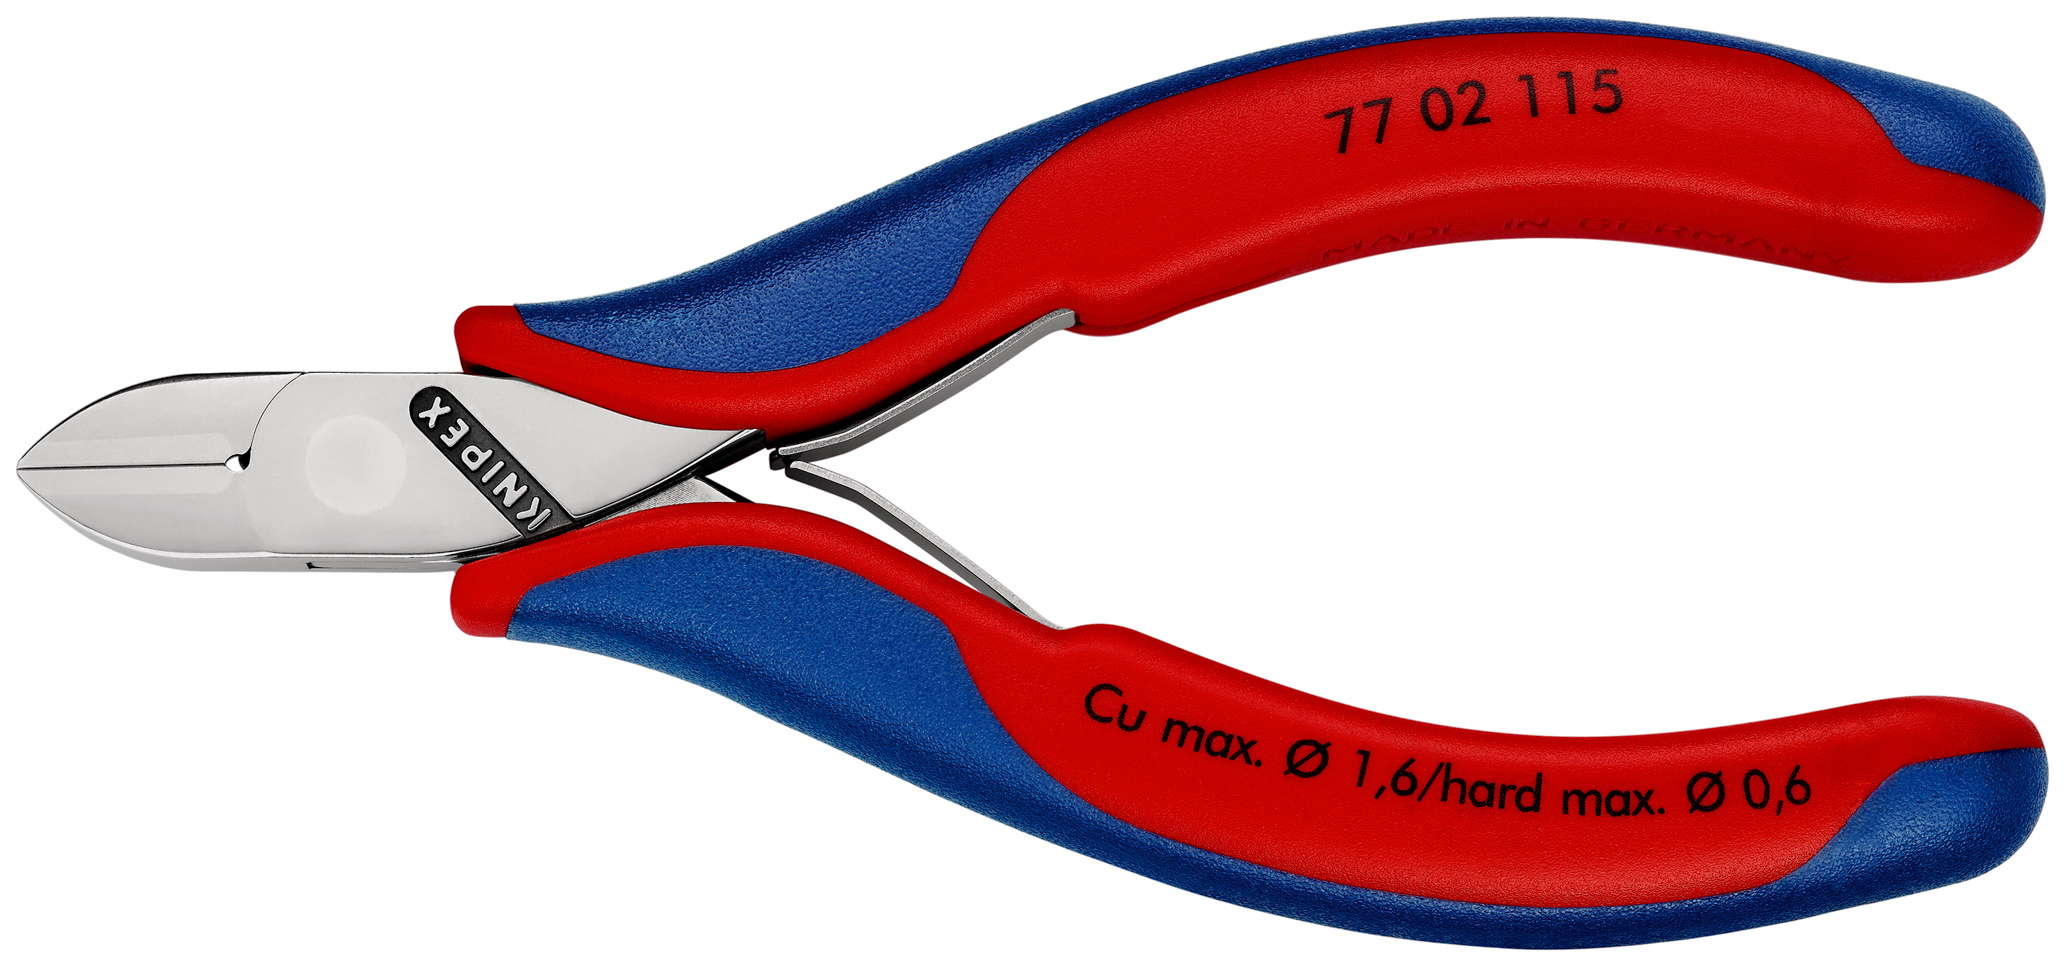 Pince coupante cote electro 115mm KNIPEX - 77 02 115